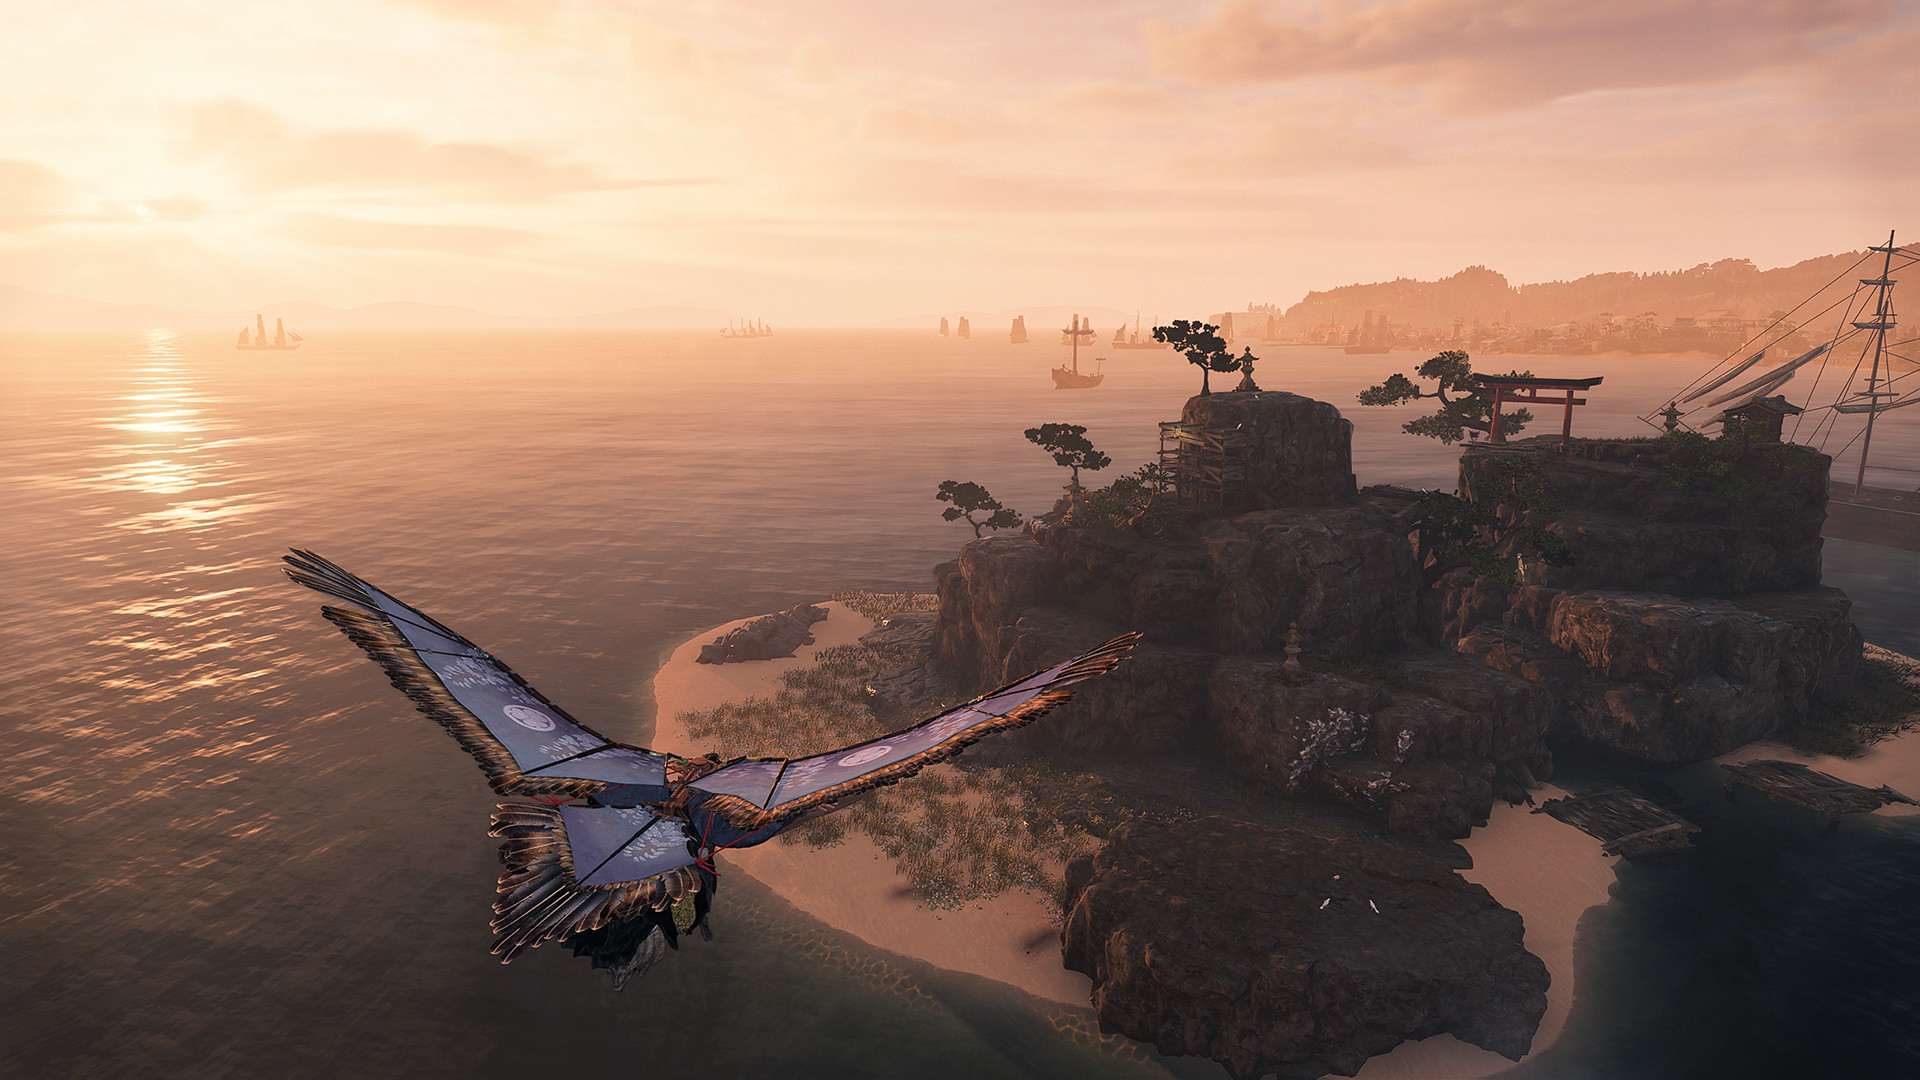 A sea side scene. Day break. In the far distance, ships sail towards a nearby port. At the front of the image, a character with the Avicula glider deployed soars towards a nearby island.